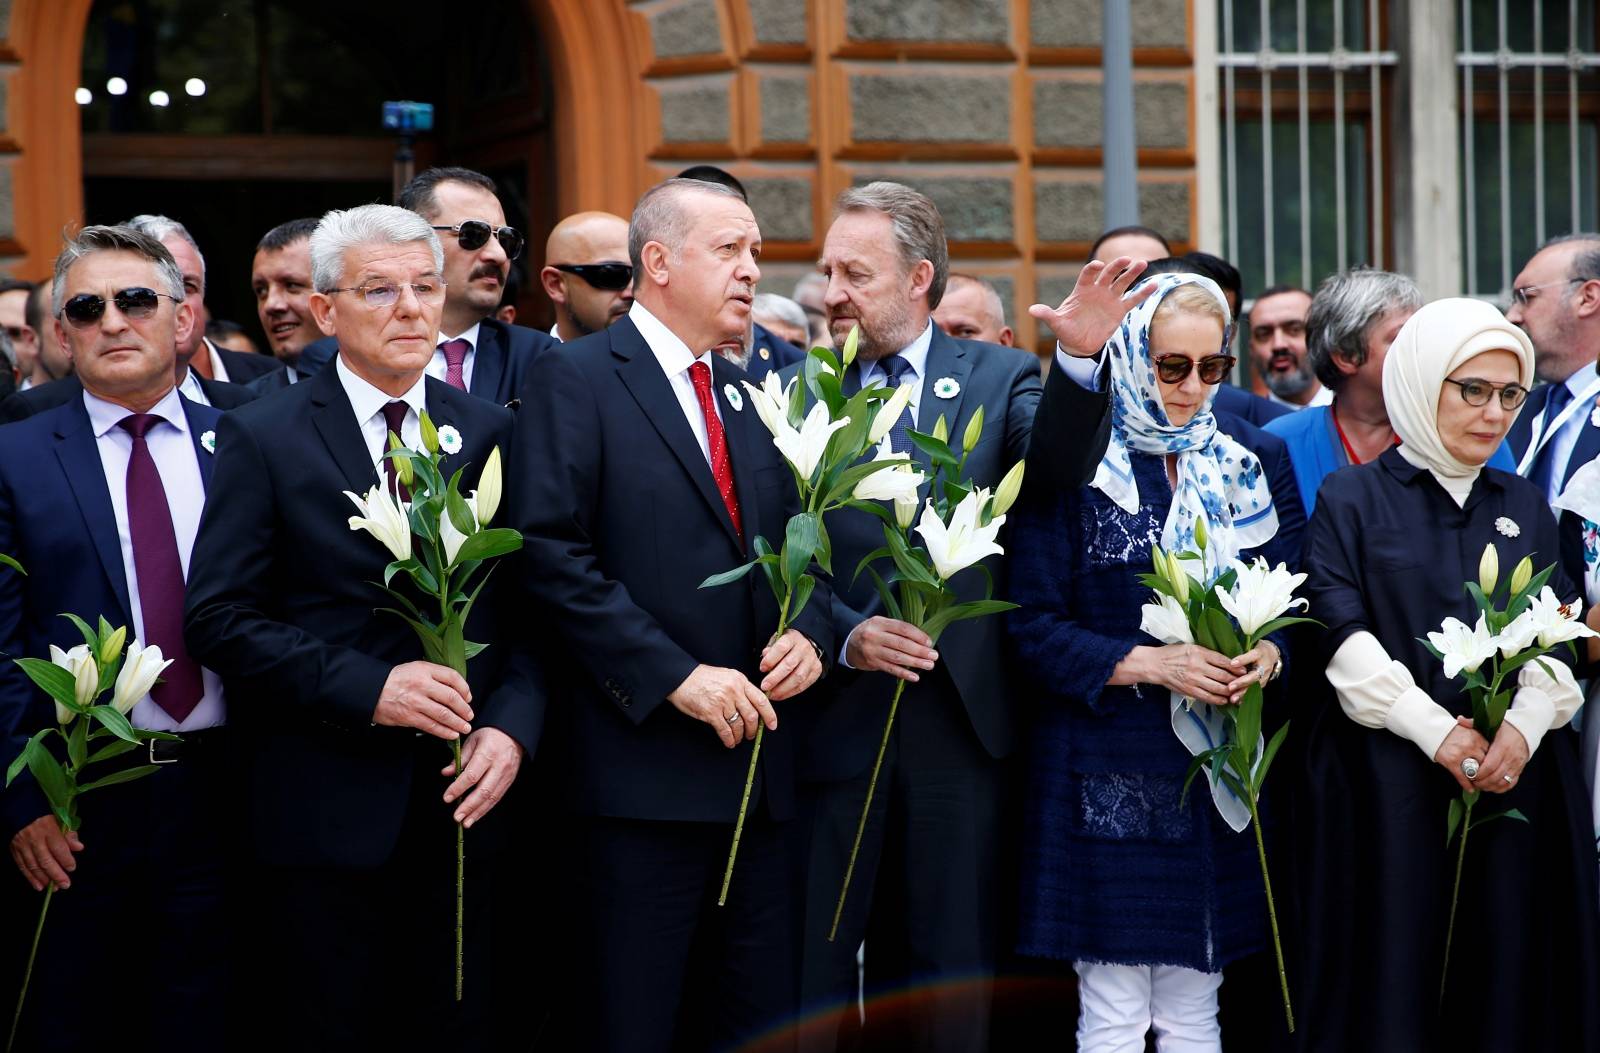 Members of Bosnian Presidency Zeljko Komsic and Sefik Dzaferovic, Turkey's President Recep Tayyip Erdogan with his wife Emine Erdogan and Bakir Izetbegovic pay their respects at a convoy carrying remains of the Srebrenica genocide victims, in Sarajevo